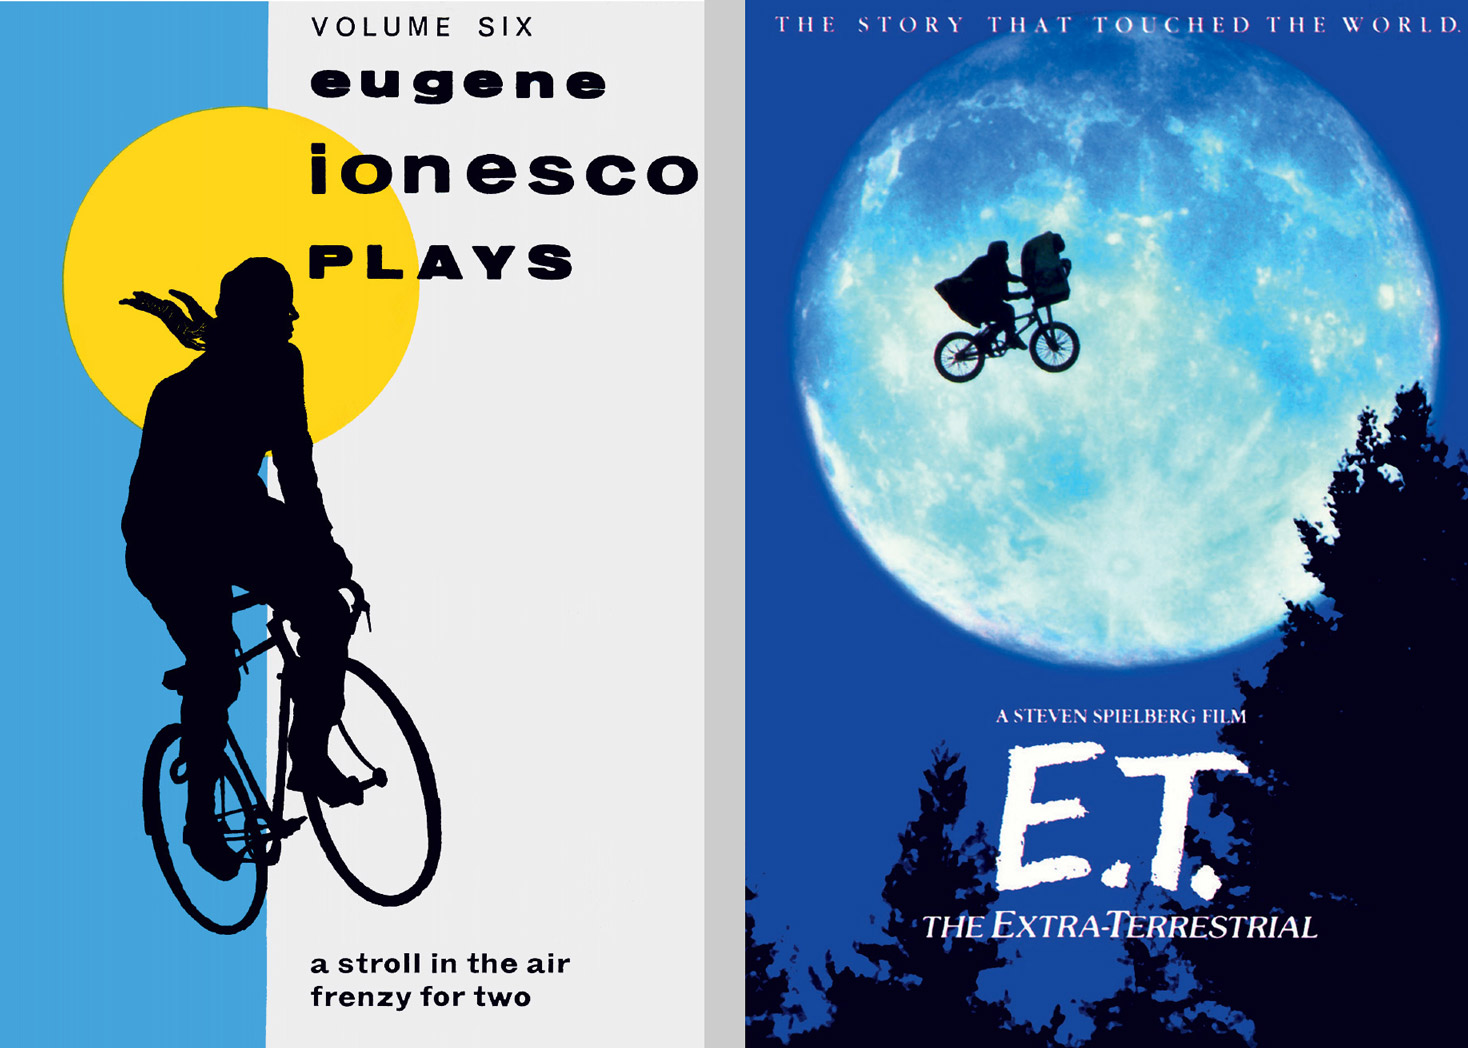 Two images, the first of which is a cover for an edition of two plays by Eugene Ionesco. The second is a 1982 poster for Steven Spielberg's film E.T.